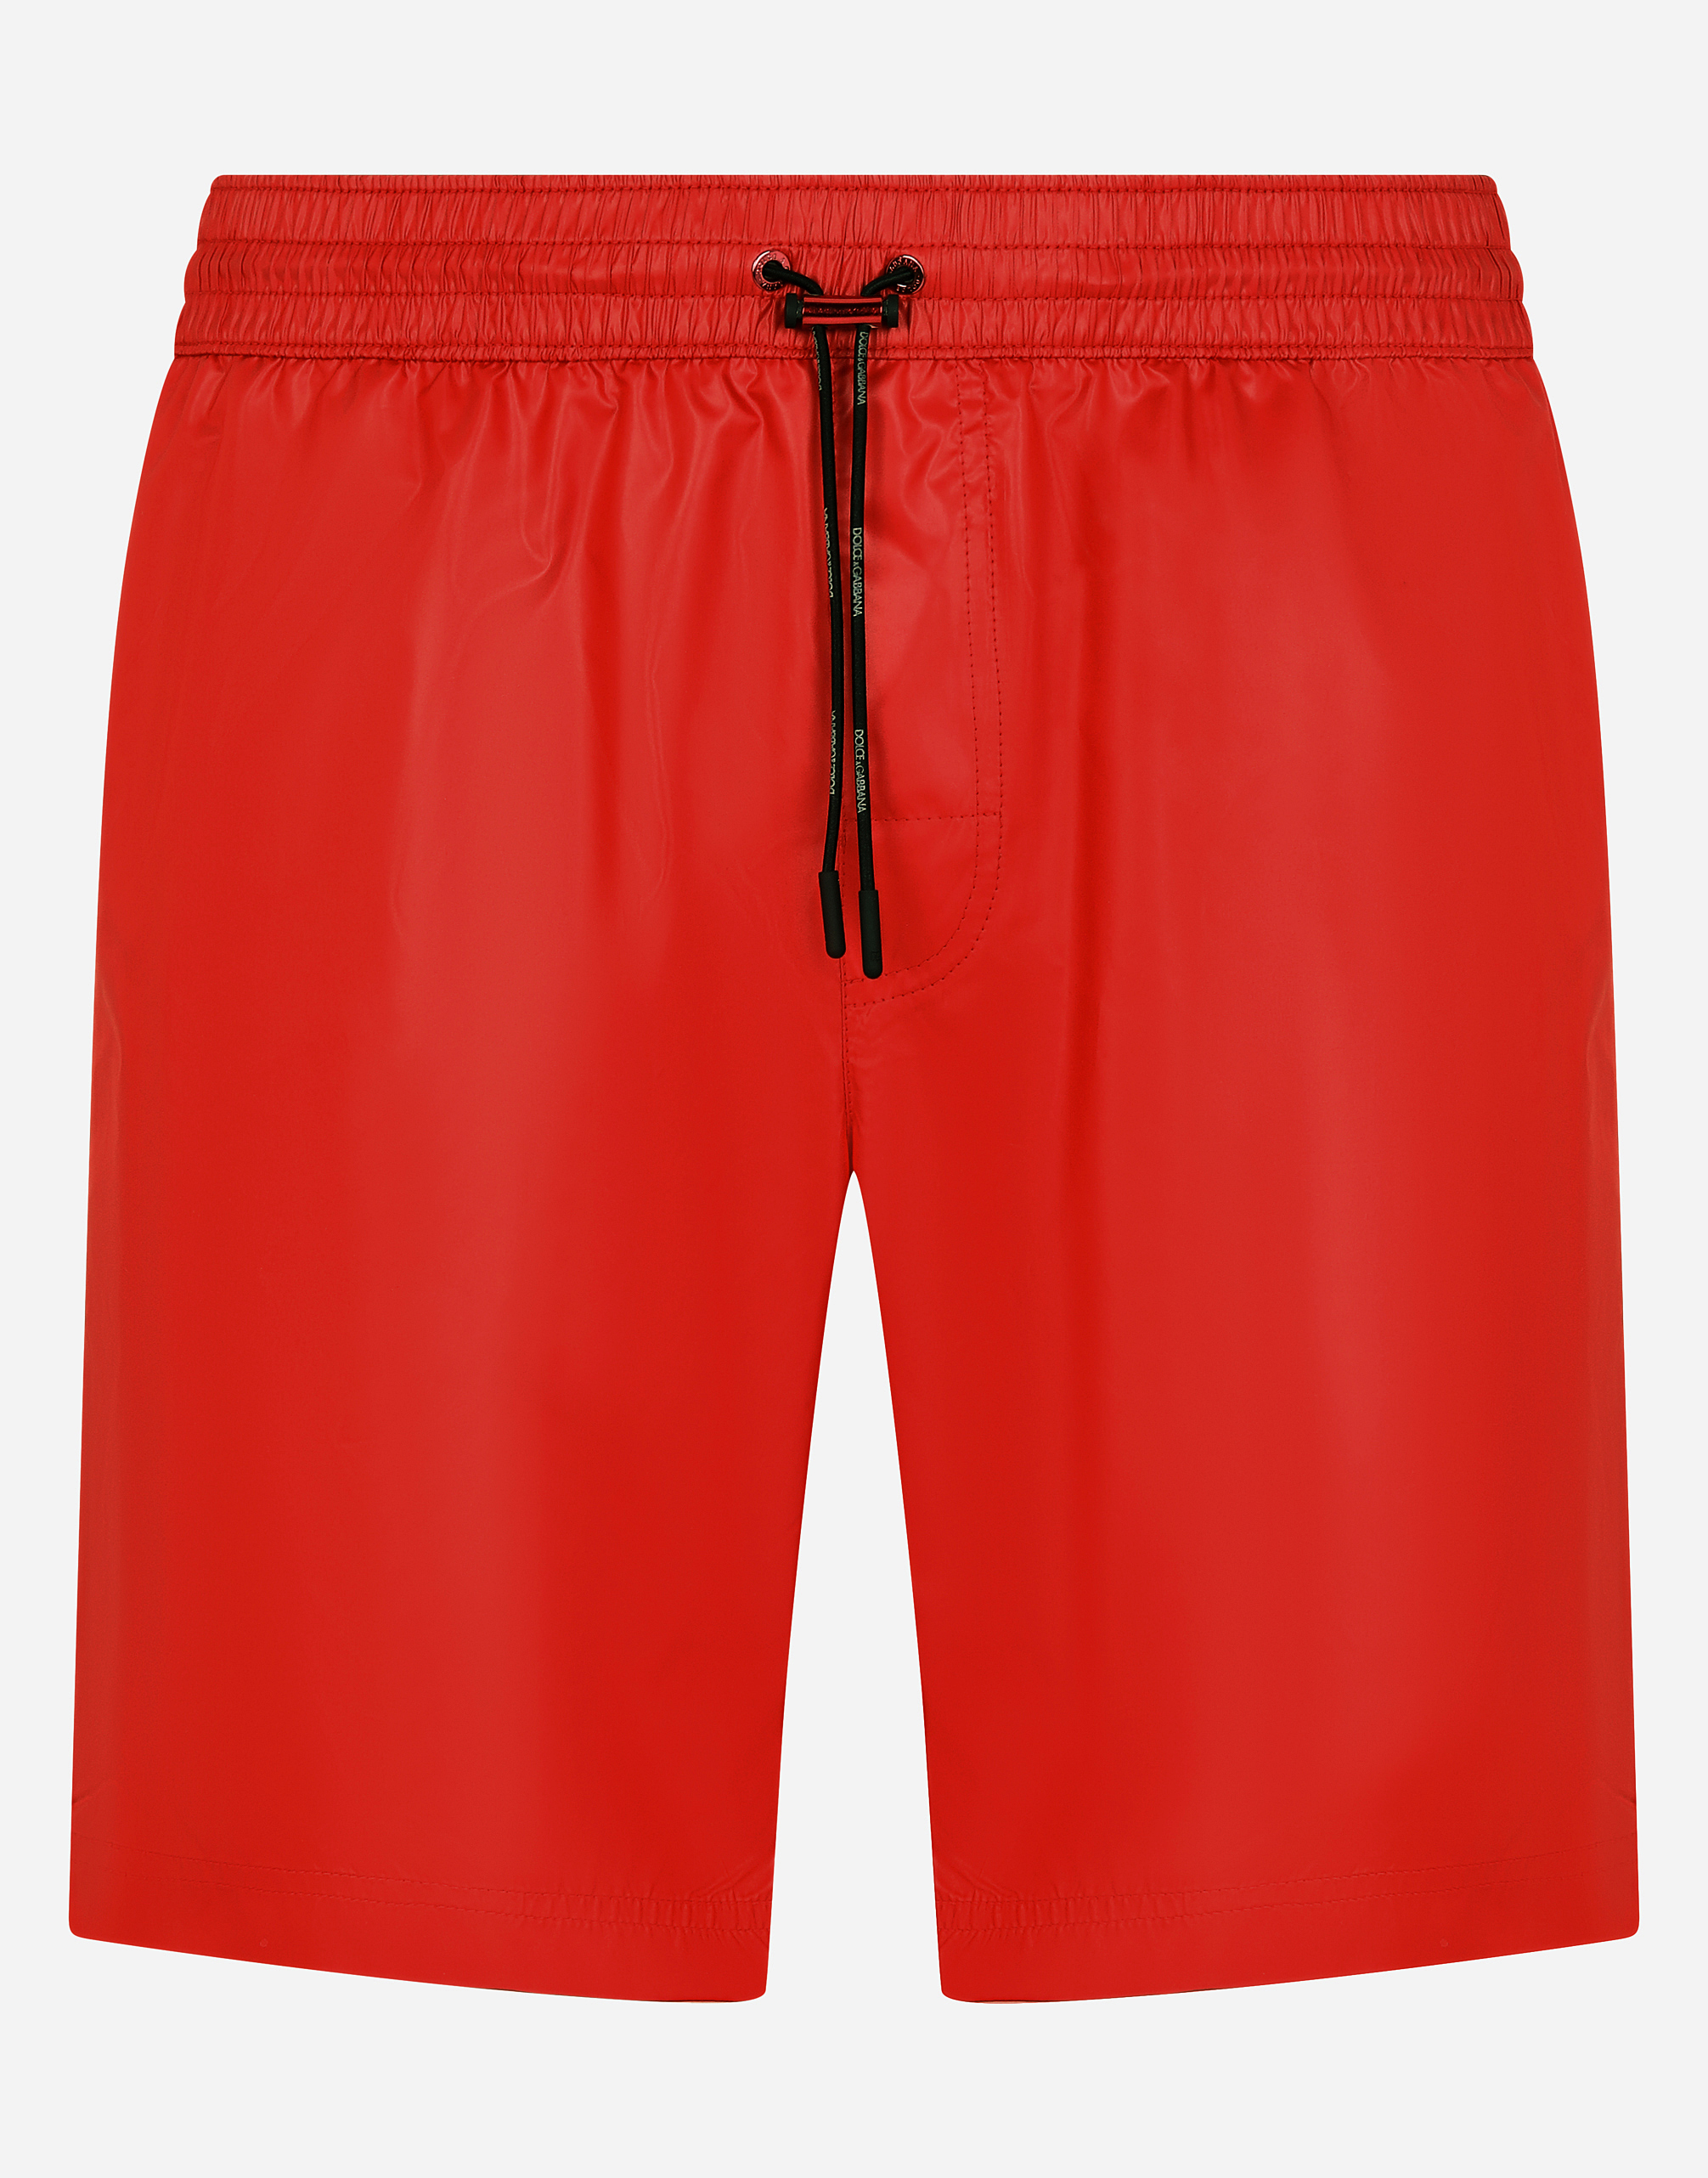 Mid-length swim trunks with side bands in Red